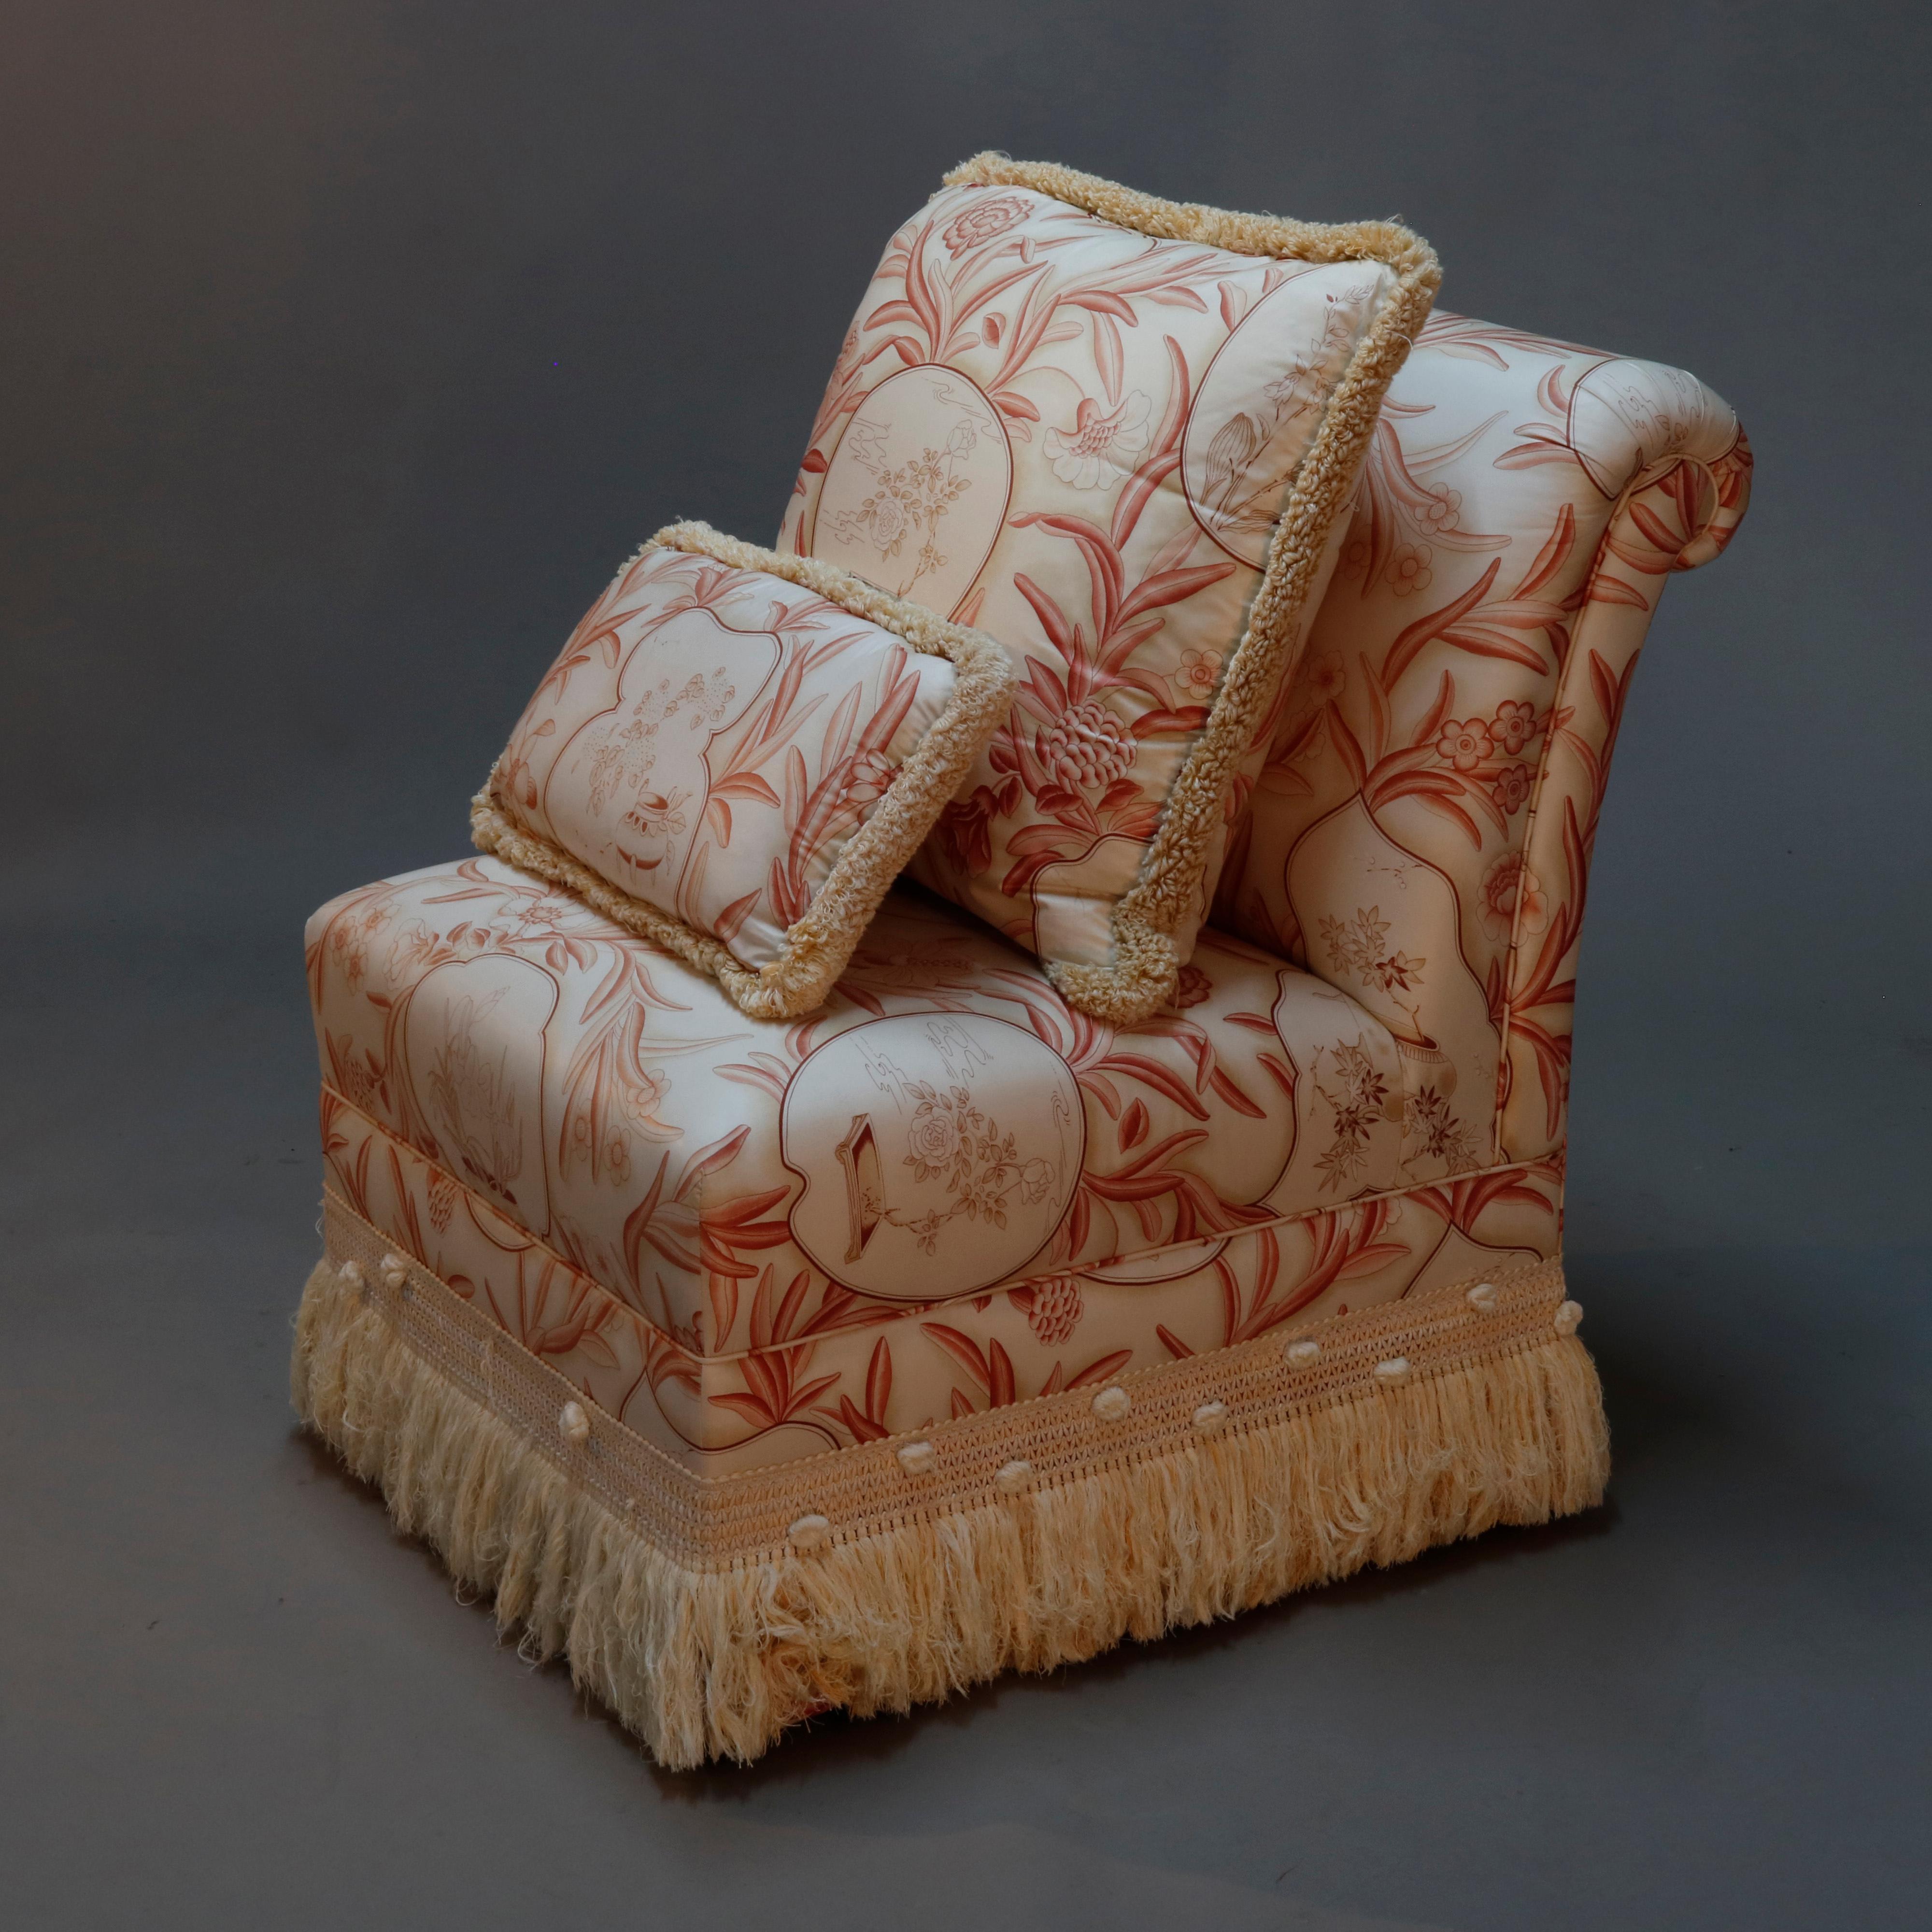 A vintage set of boudoir slipper chairs by Piedmont are upholstered in chinoiserie designed fabric with scrolled backs surmounting fringed bases, four matching pillows, 20th century

Measures: 34.25